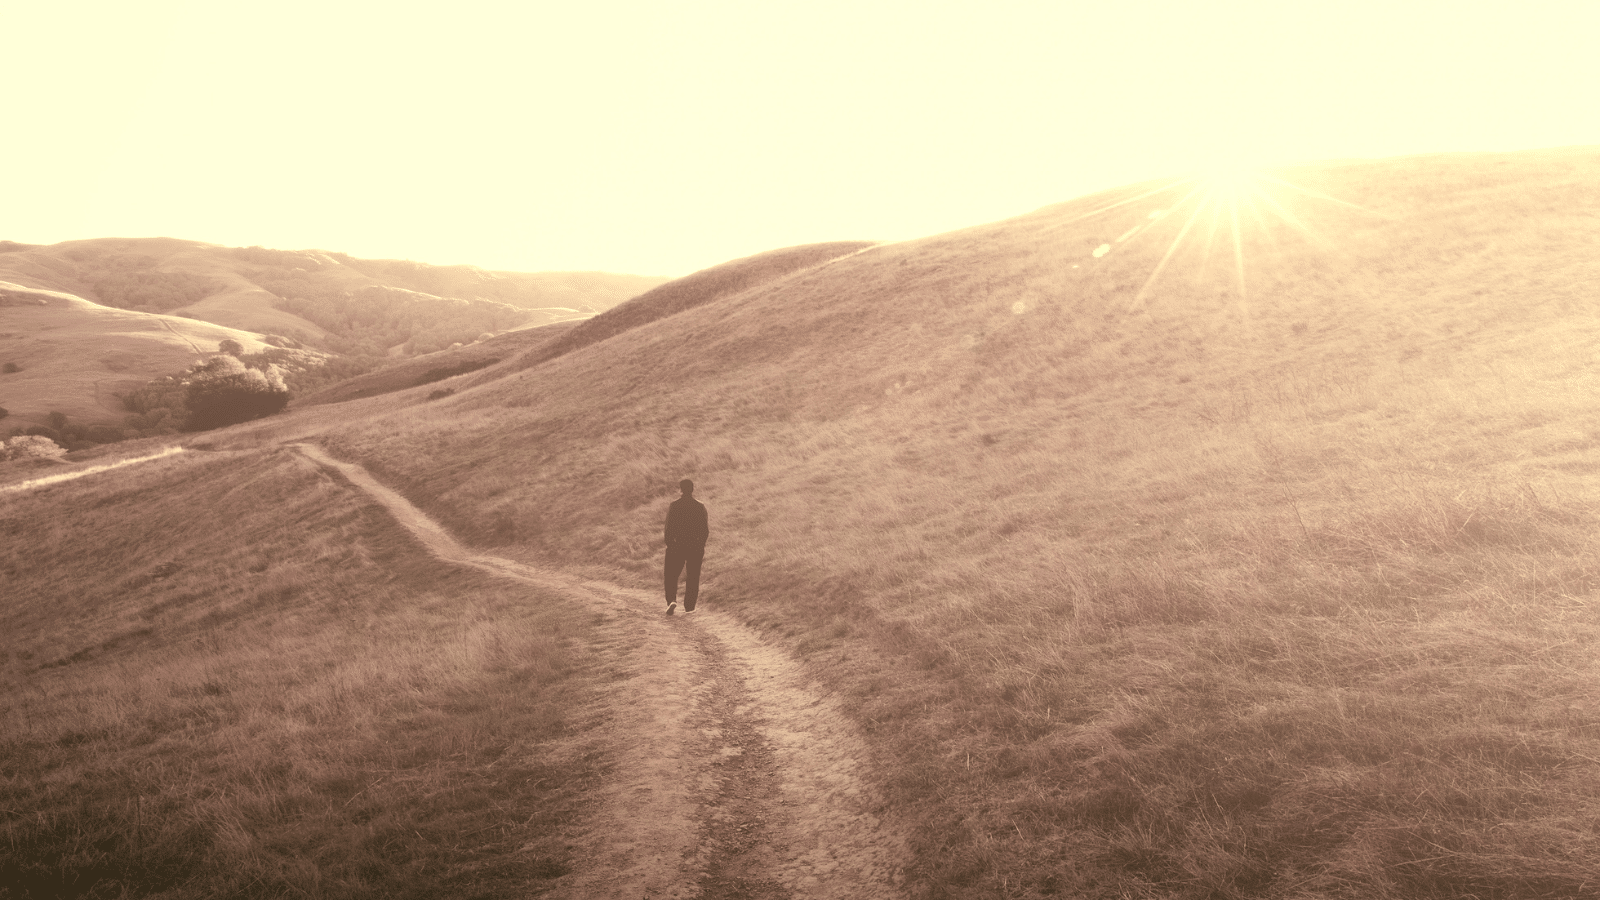 A man walking on a path on a mountainside, at sunset.